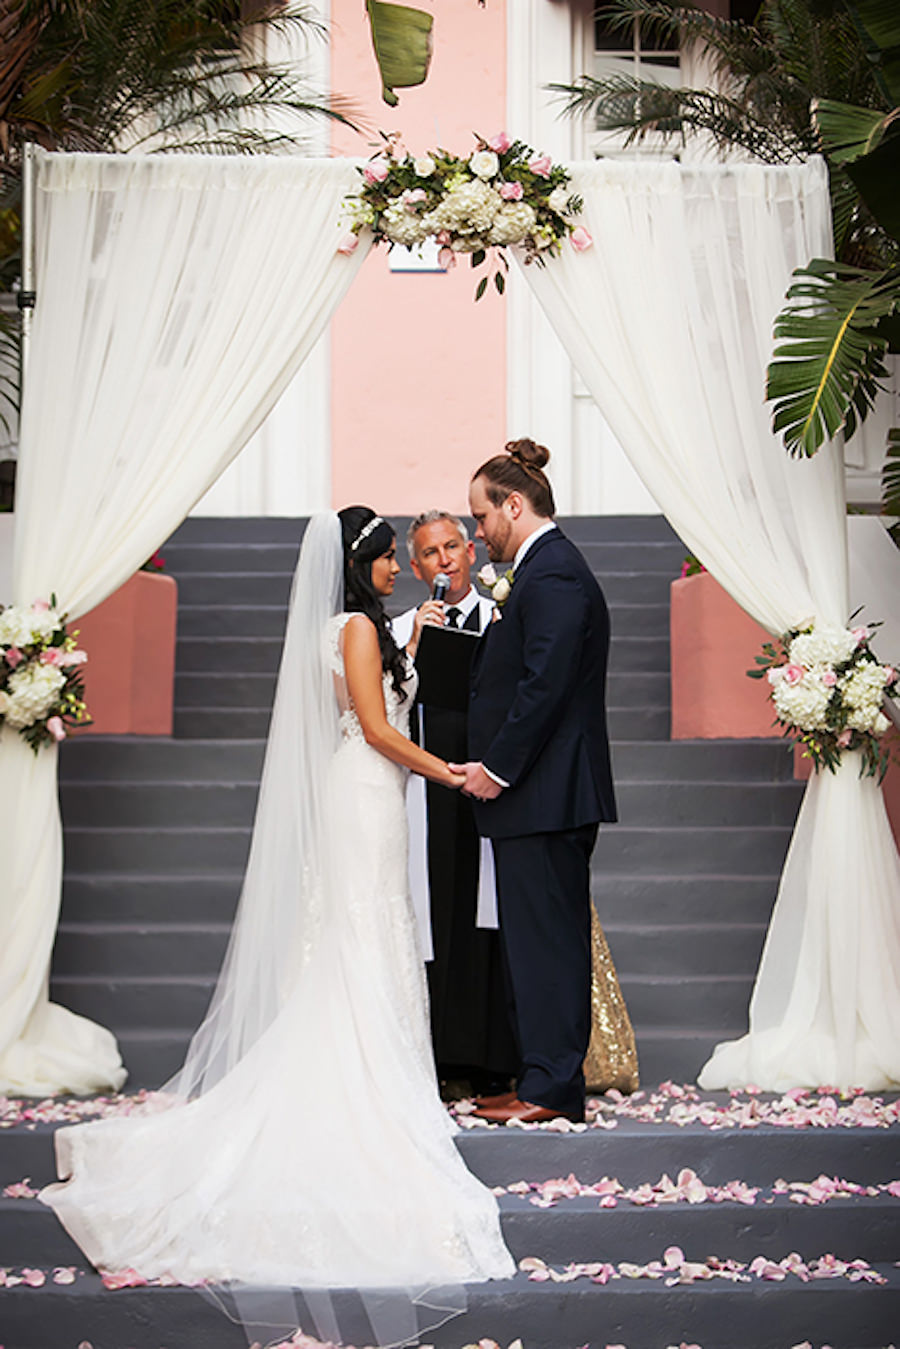 St Petersburg Outdoor Wedding Ceremony with White Tulle Wedding Arch and Light Pink Rose Petals at Wedding Venue The Don Cesar | St Petersburg Wedding Photographer Limelight Photography